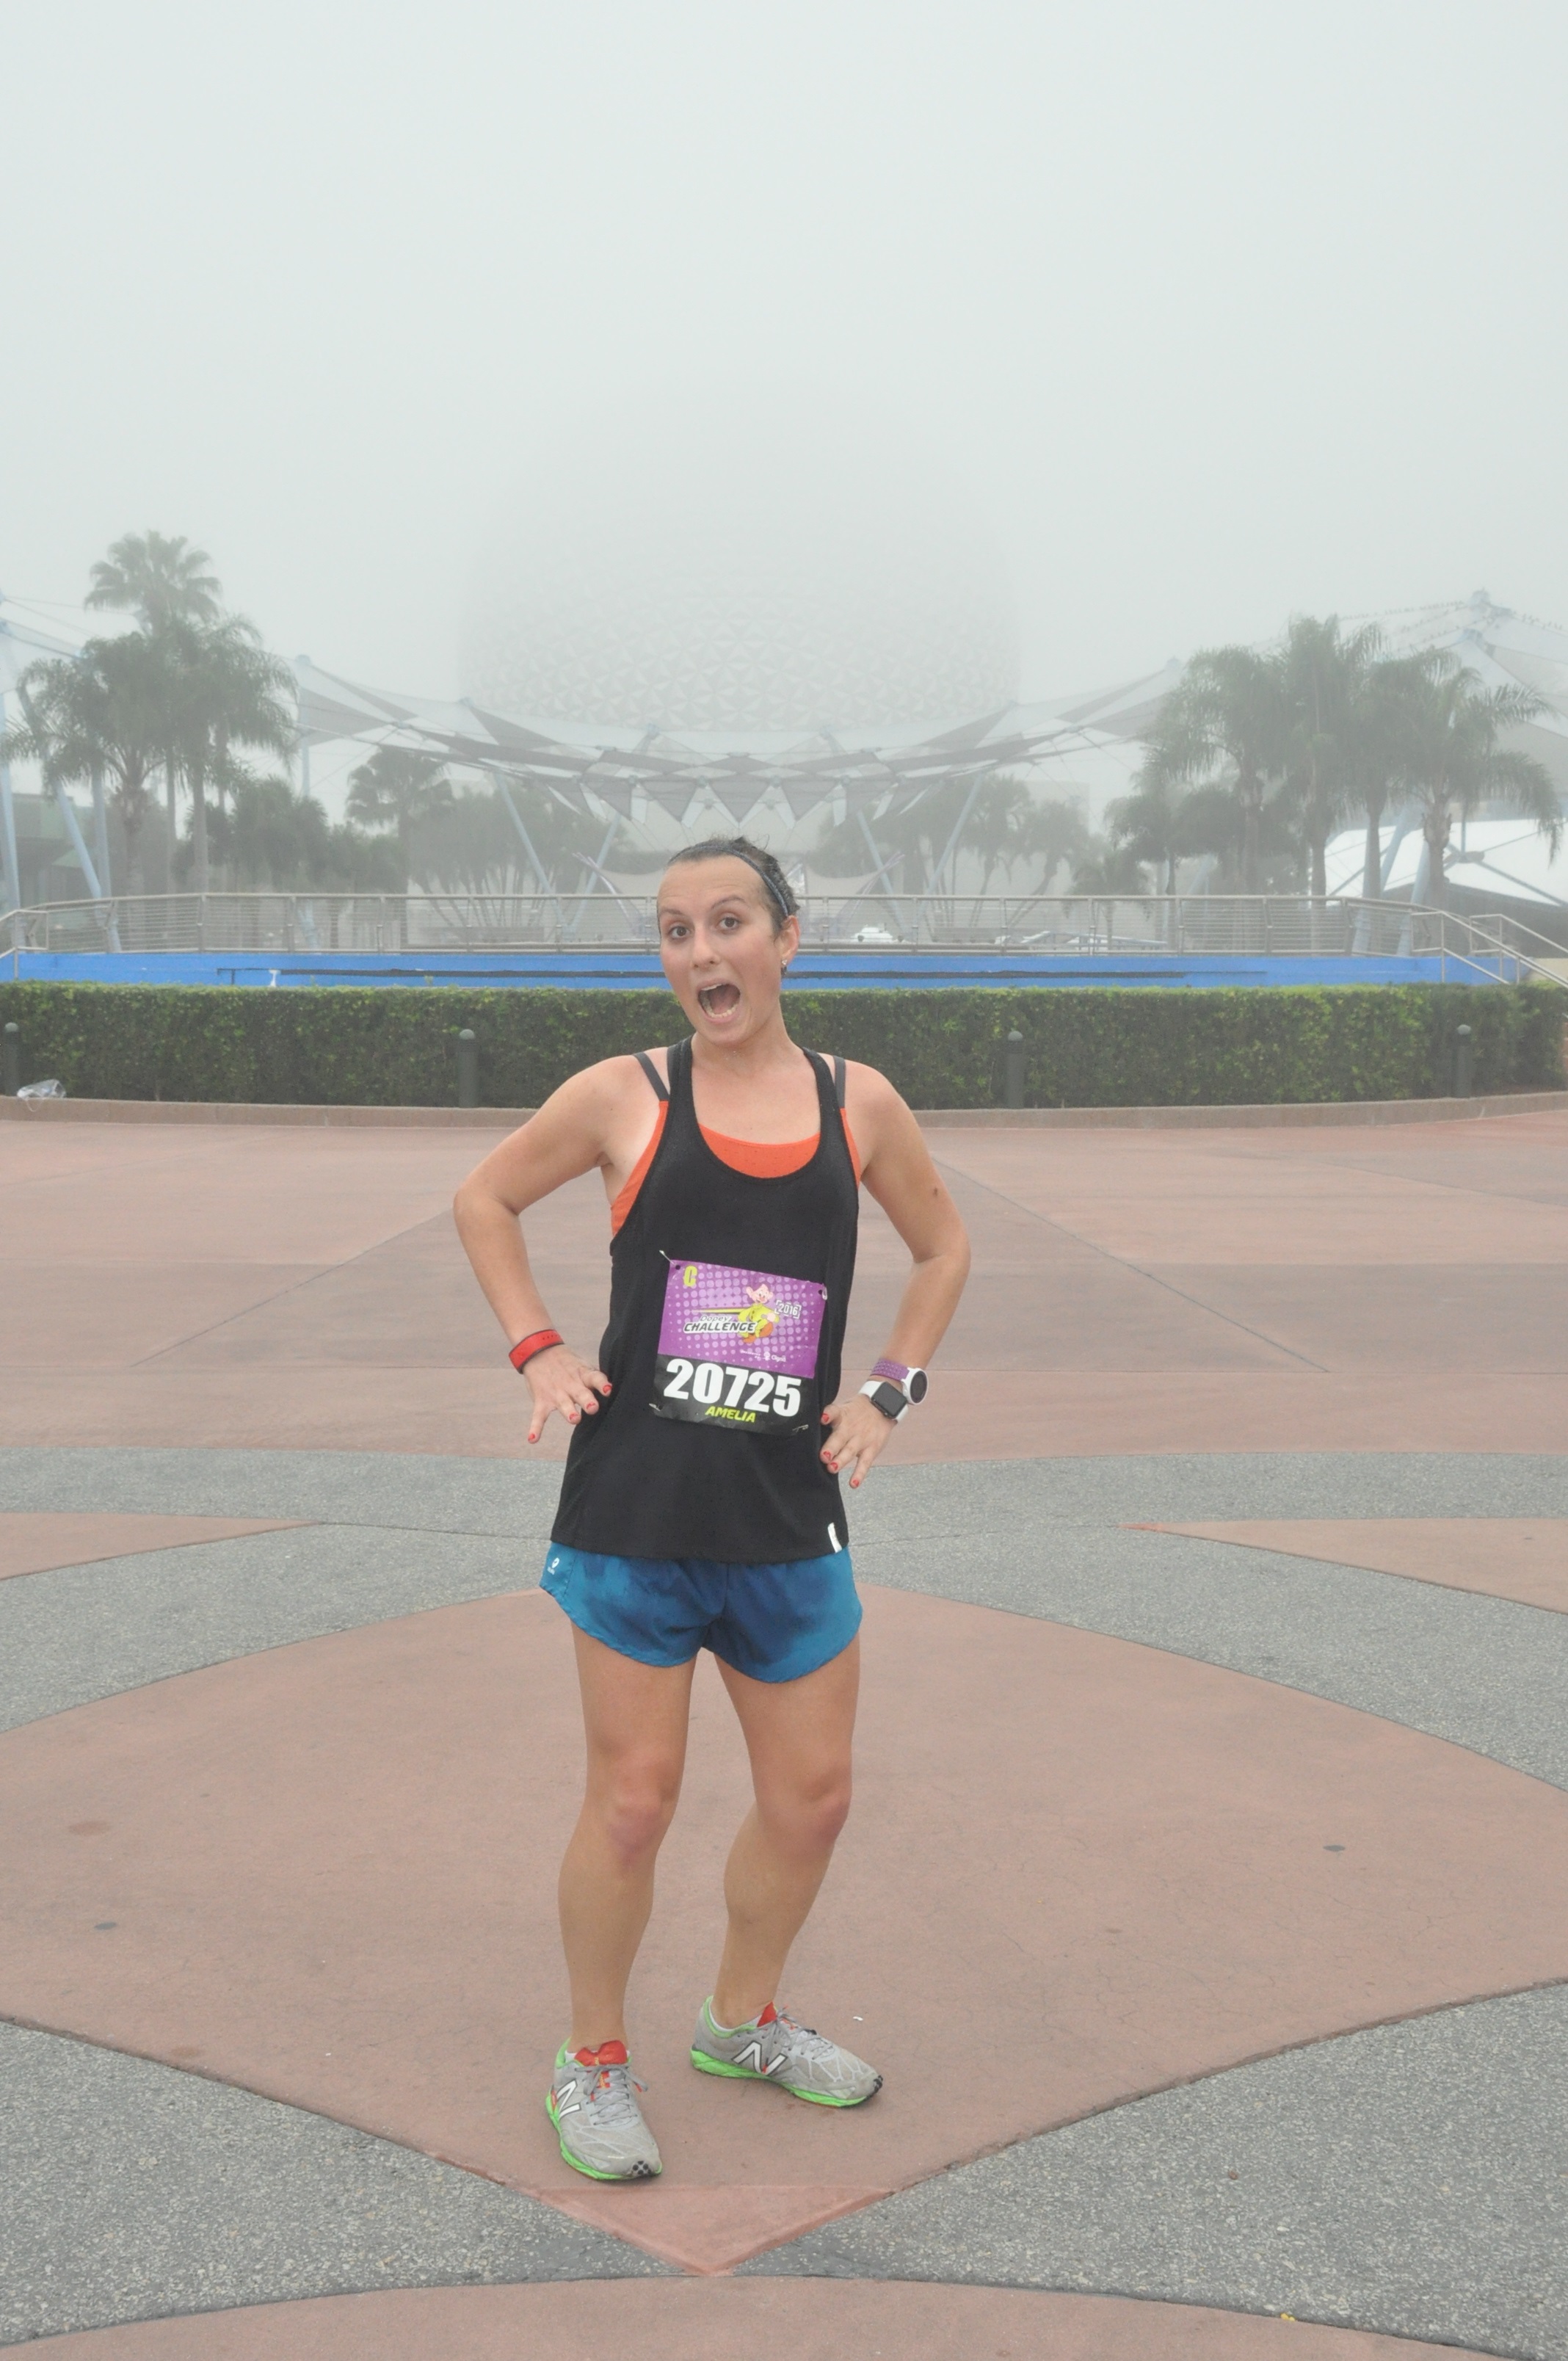 It was SO foggy all race. I promise you Spaceship Earth is behind me here!